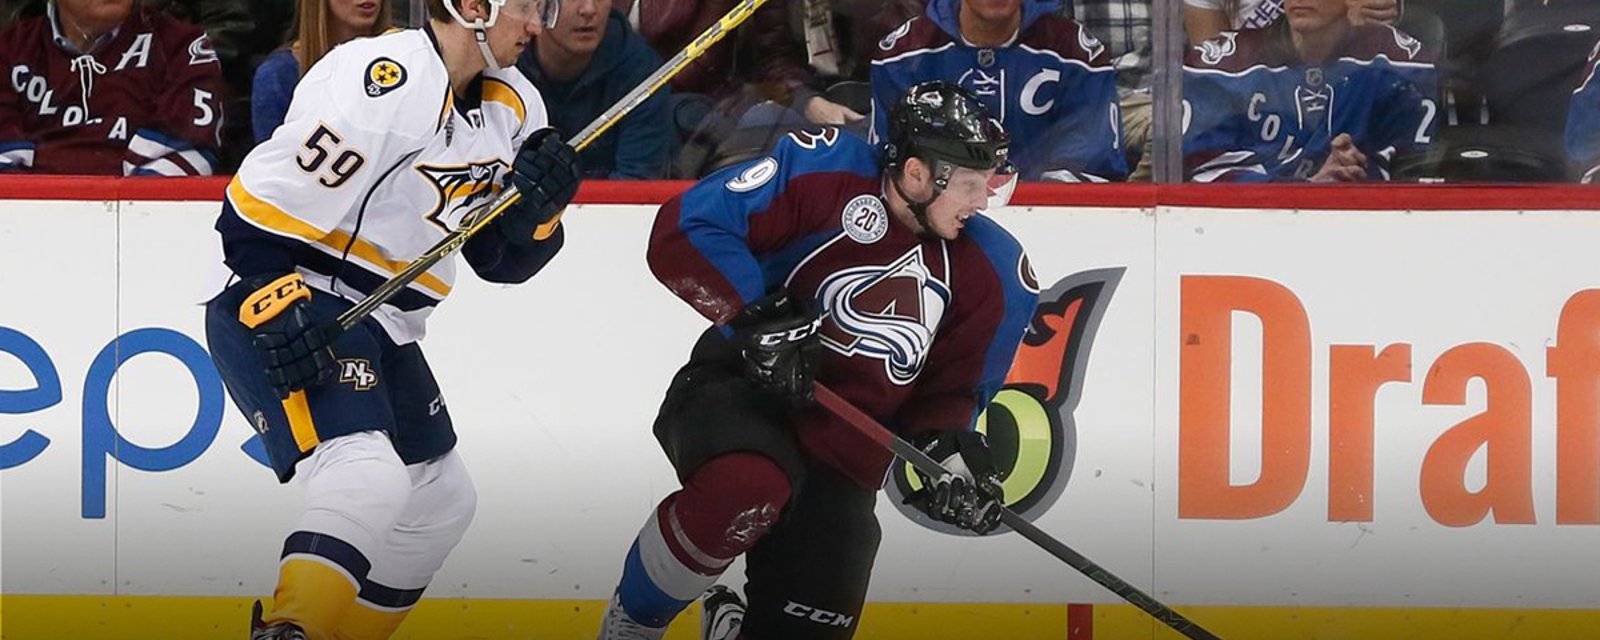 Rumor: Leaked details of proposed trade between Preds and Avs